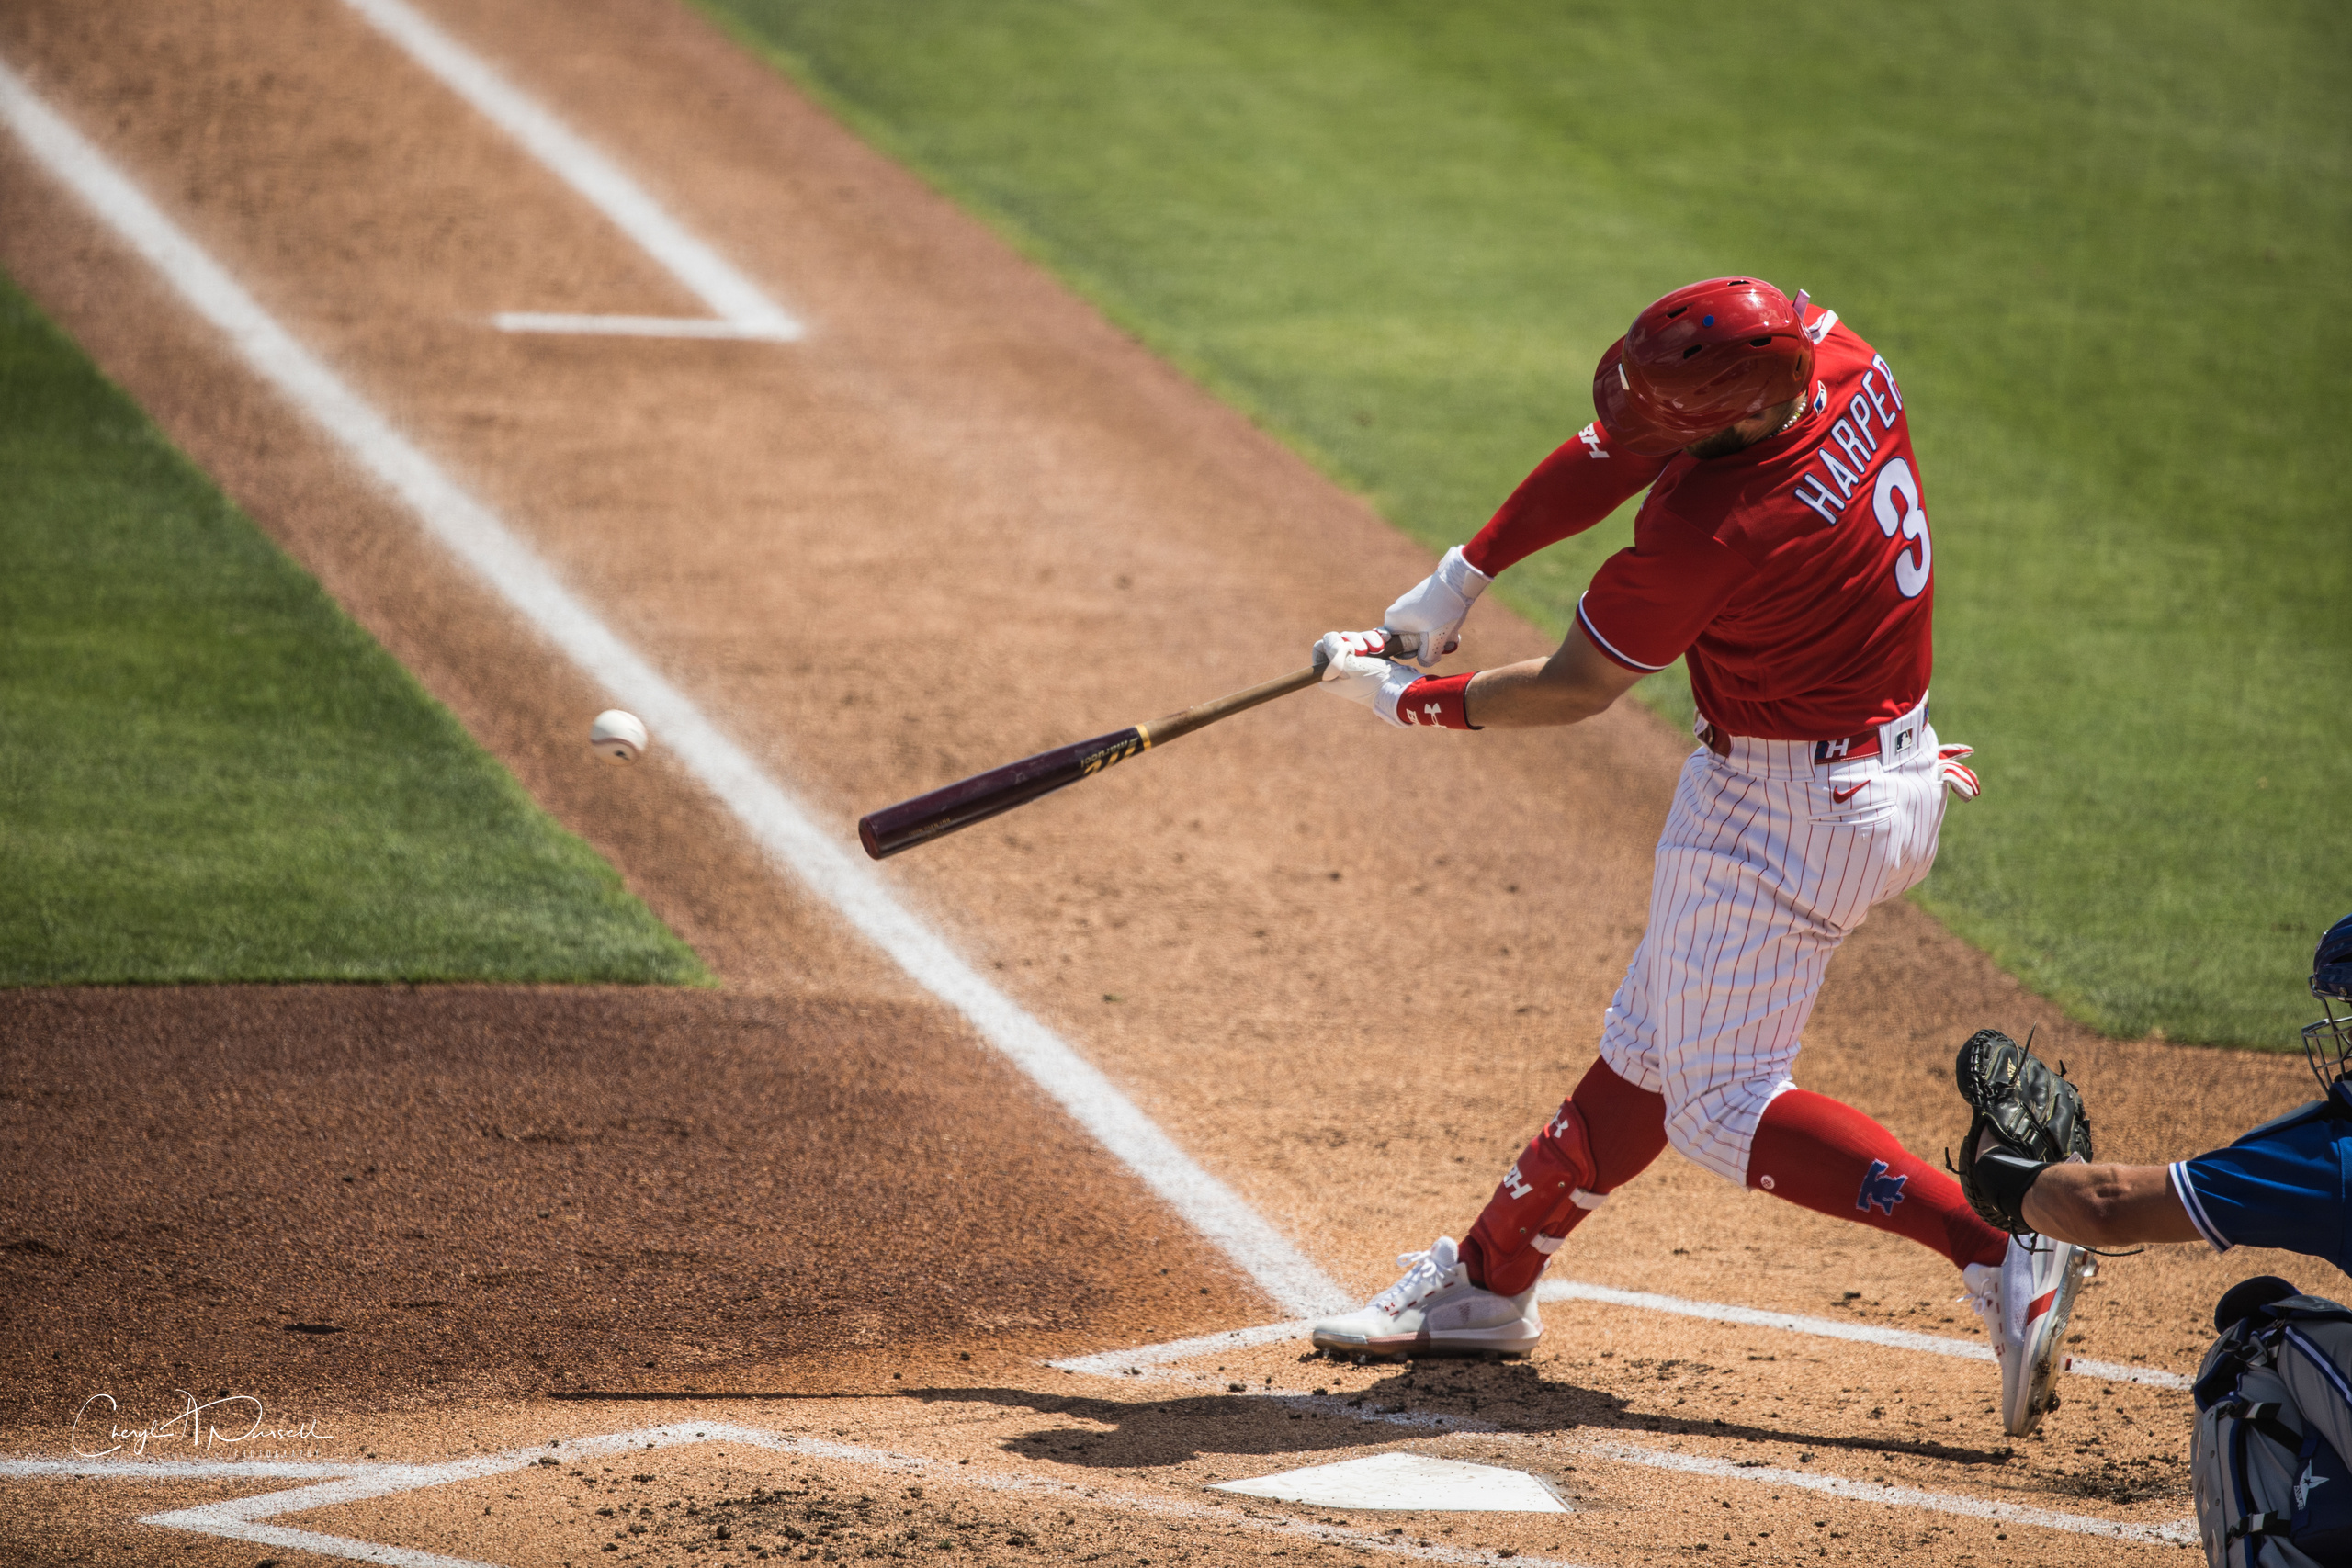 Shhhh! The Phillies are hitting a lot of home runs